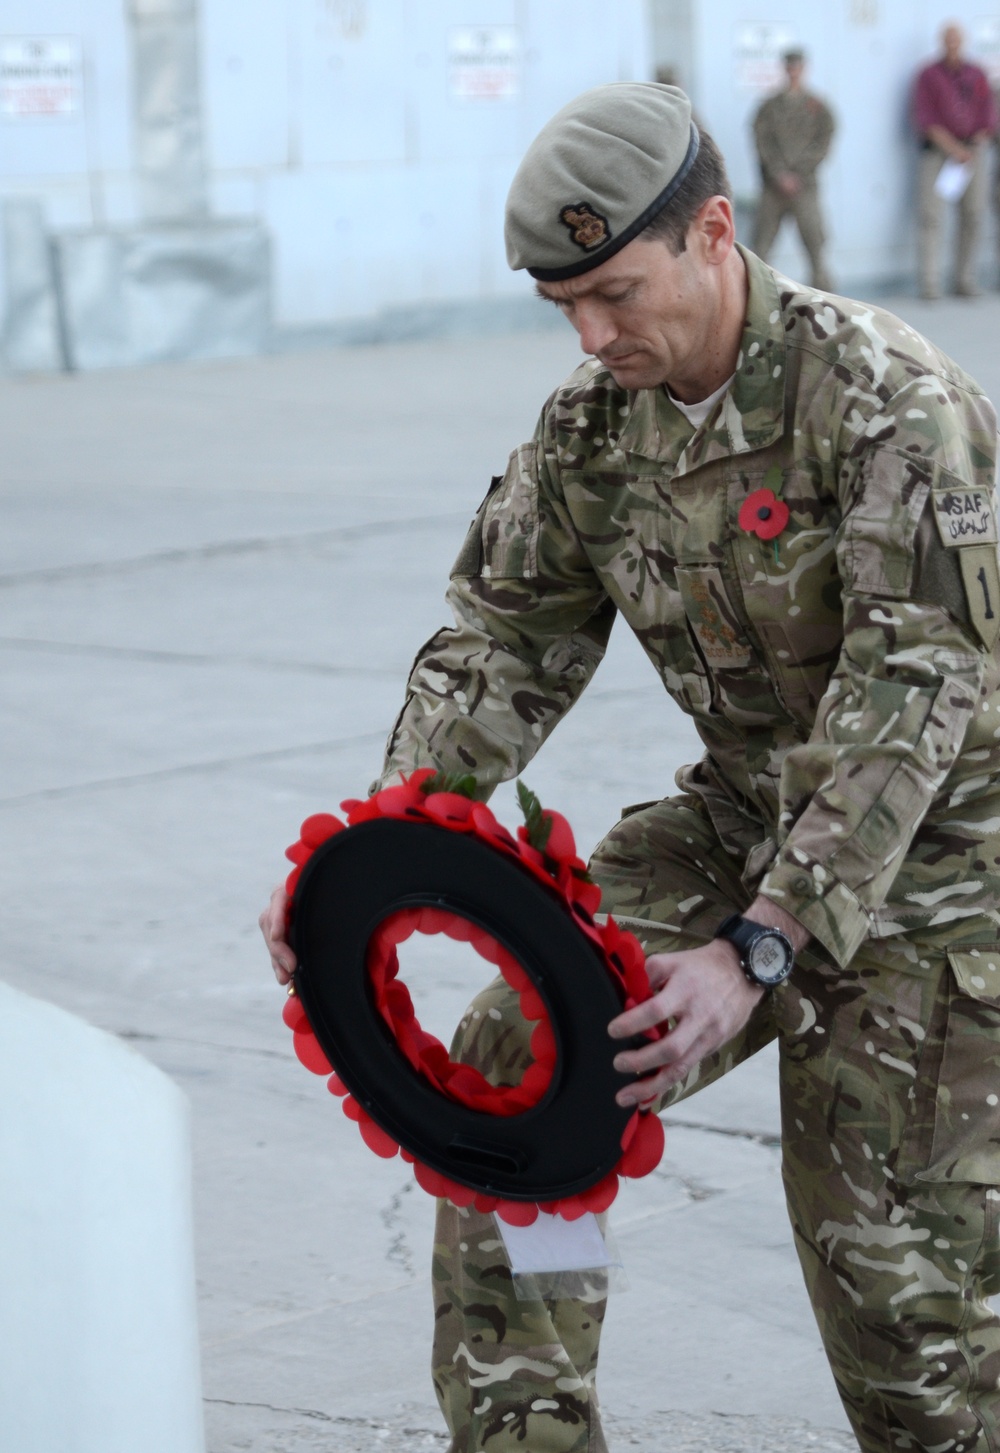 Remembrance Day ceremony held at Bagram Air Field